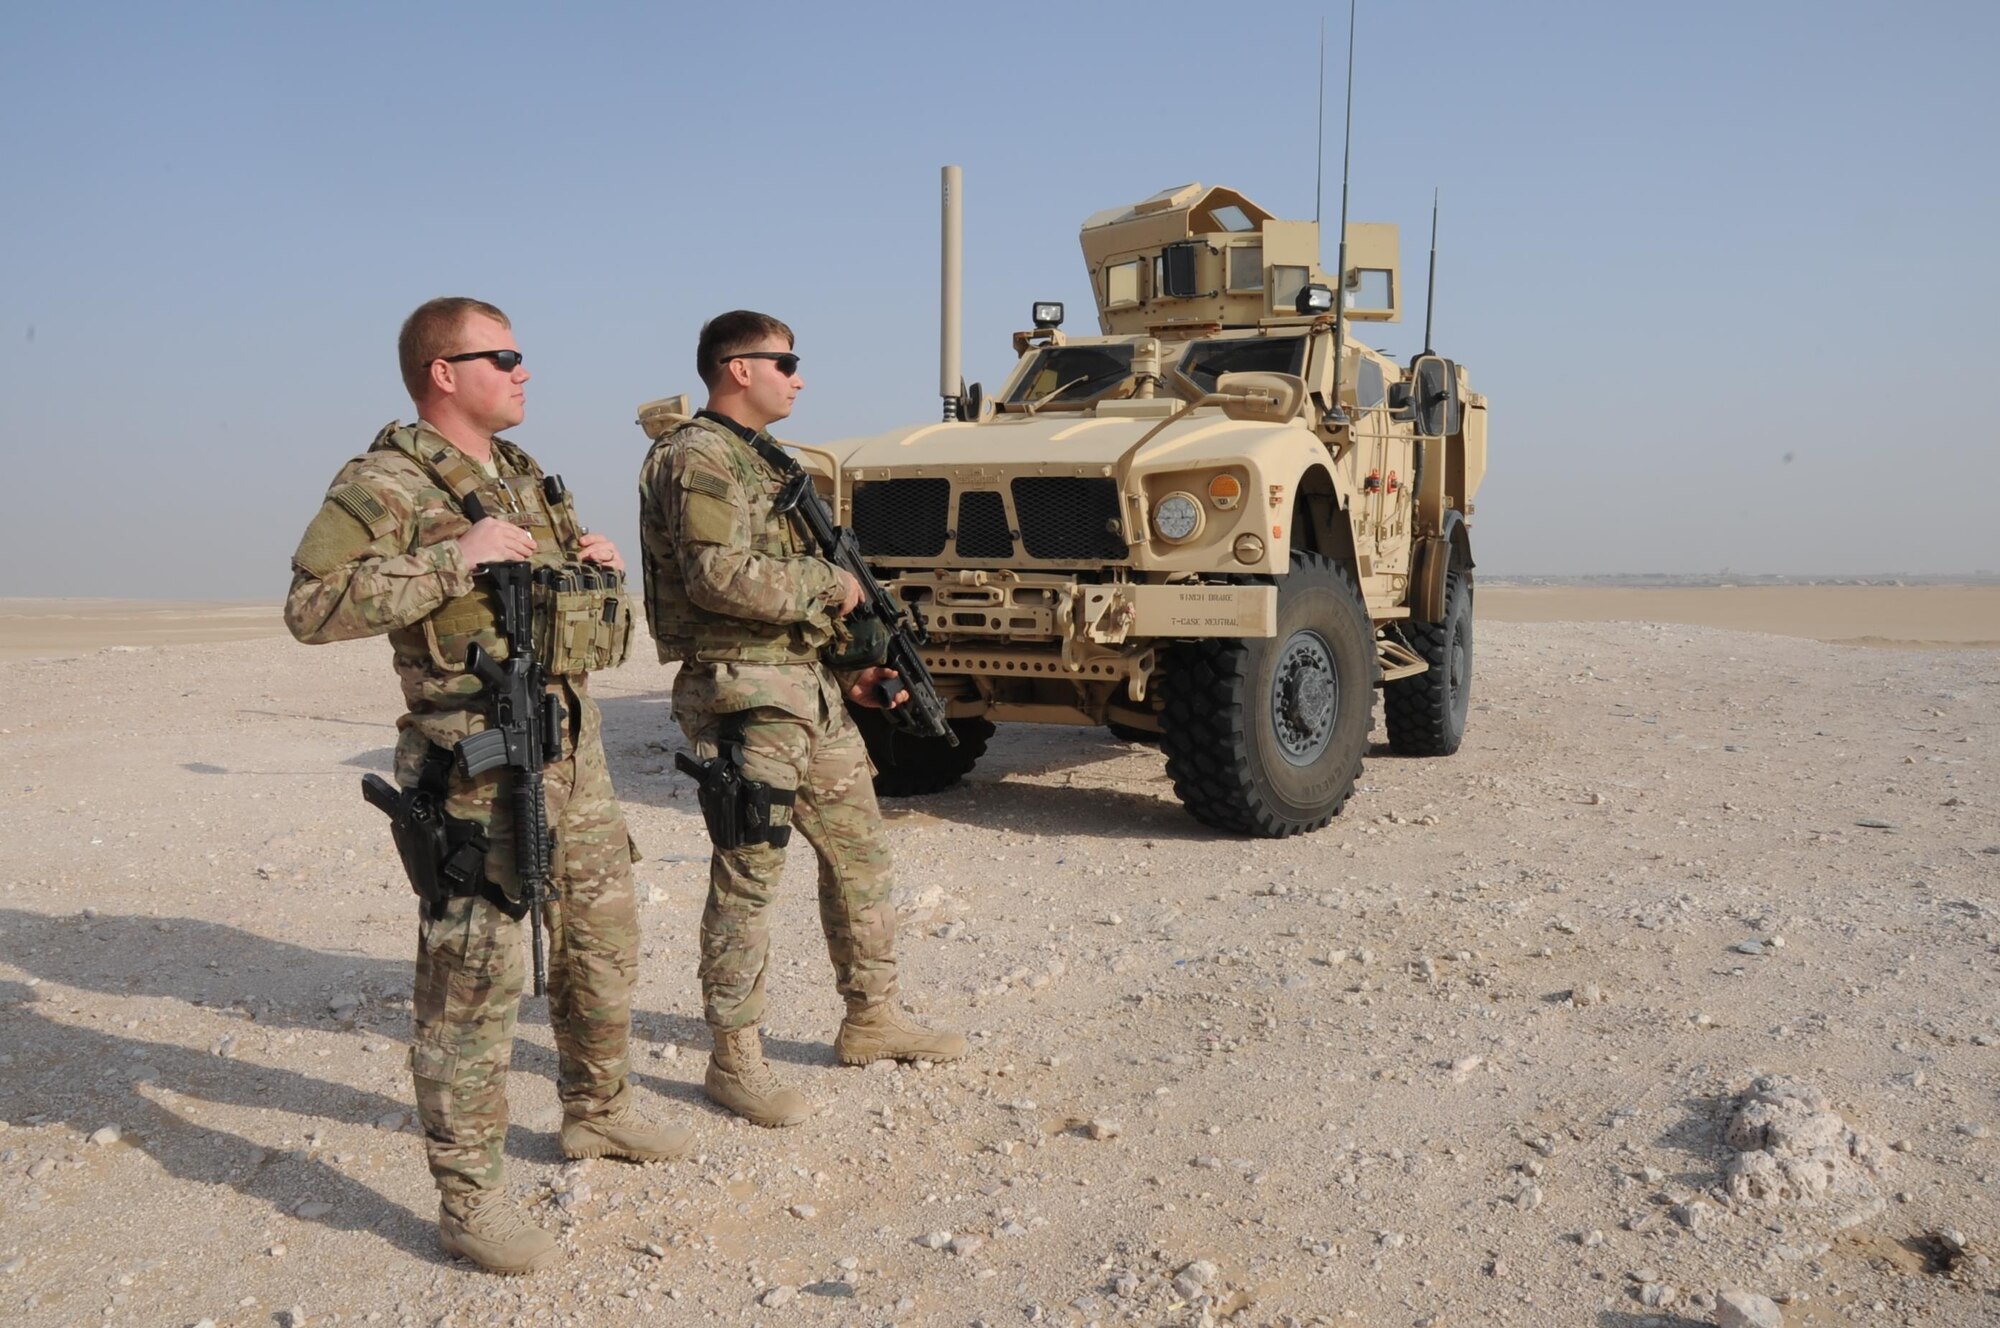 Senior Airman Rhea Flambeau, left, and Senior Airman Grayson Bryant, right, 386th Expeditionary Security Forces Squadron patrolmen, guard the base security zone at an undisclosed location in Southwest Asia Jan. 1, 2016. Both Airmen are responsible for protecting the base and building positive relationships with local citizens within the surrounding camps. (U.S. Air Force photo/Tech. Sgt. Kenneth McCann)